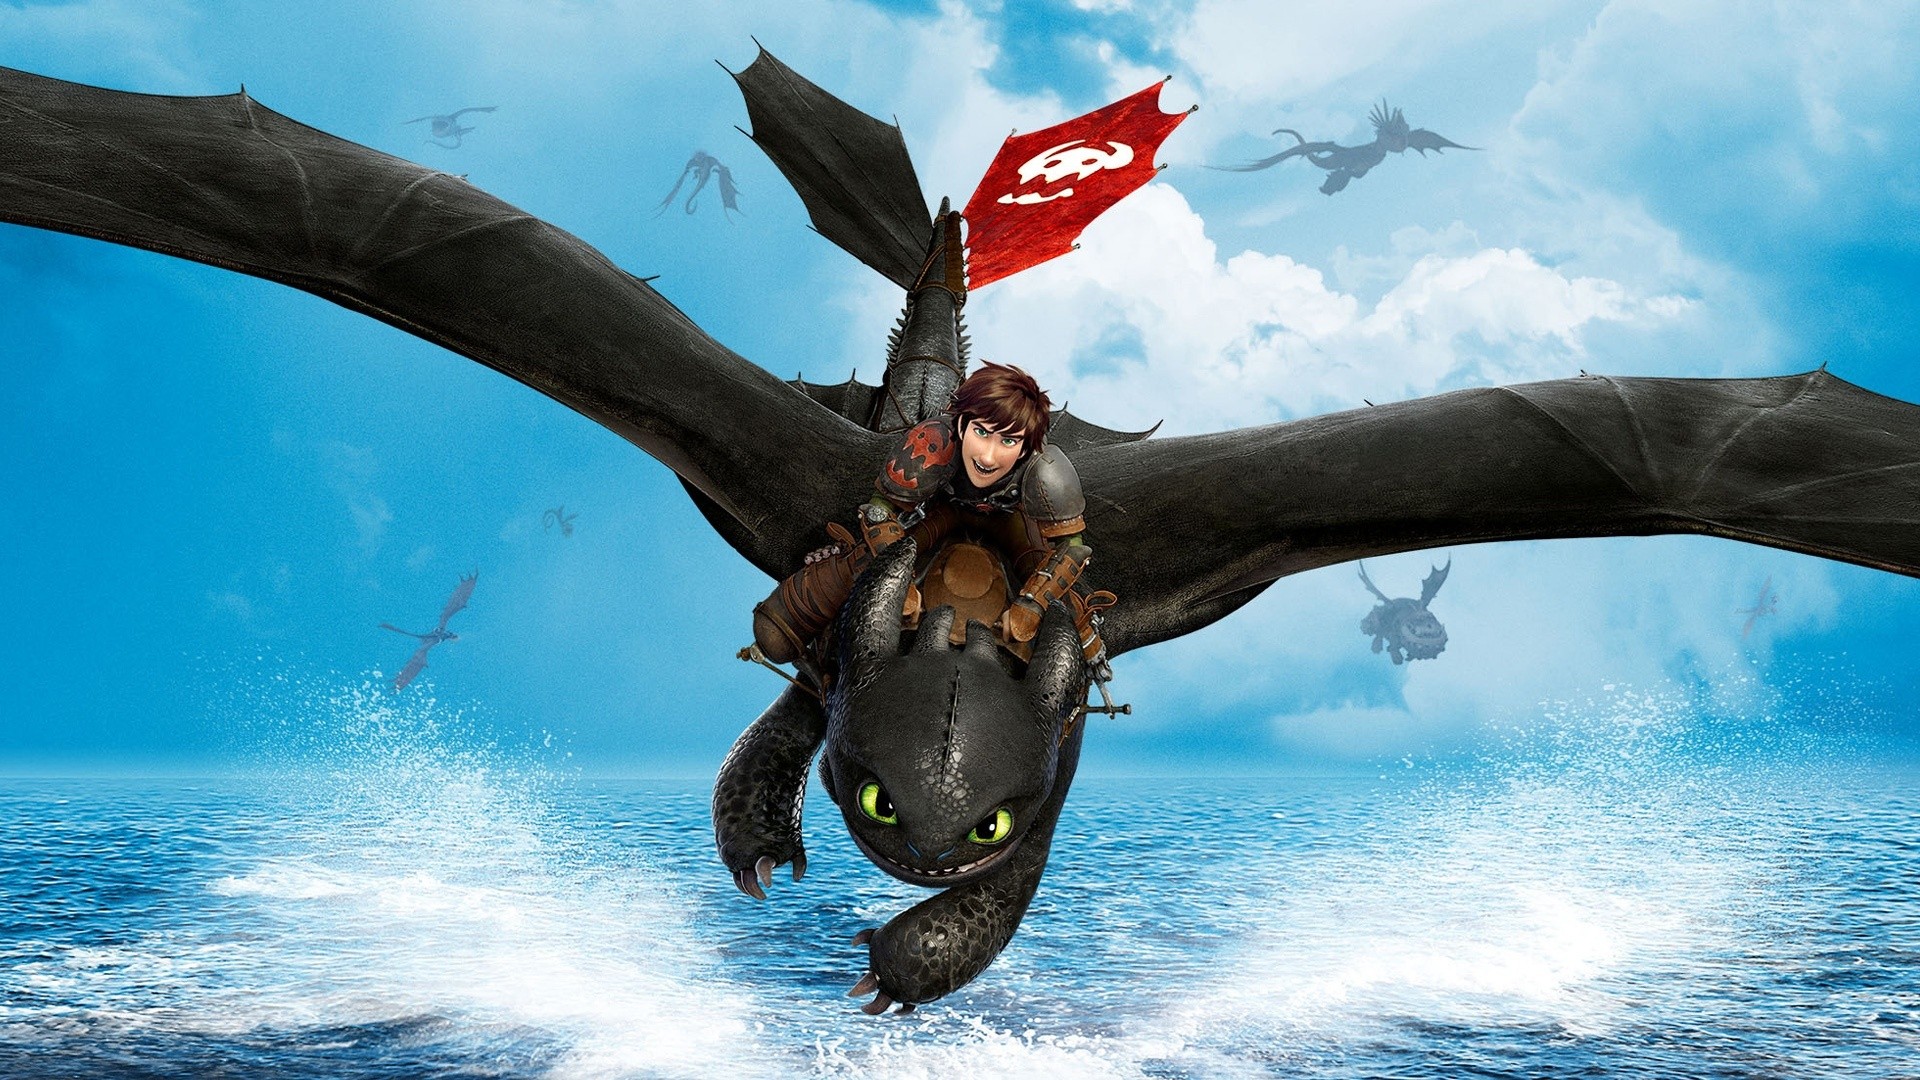 General 1920x1080 How to Train Your Dragon How to Train Your Dragon 2 animation movies dragon Toothless blue cyan